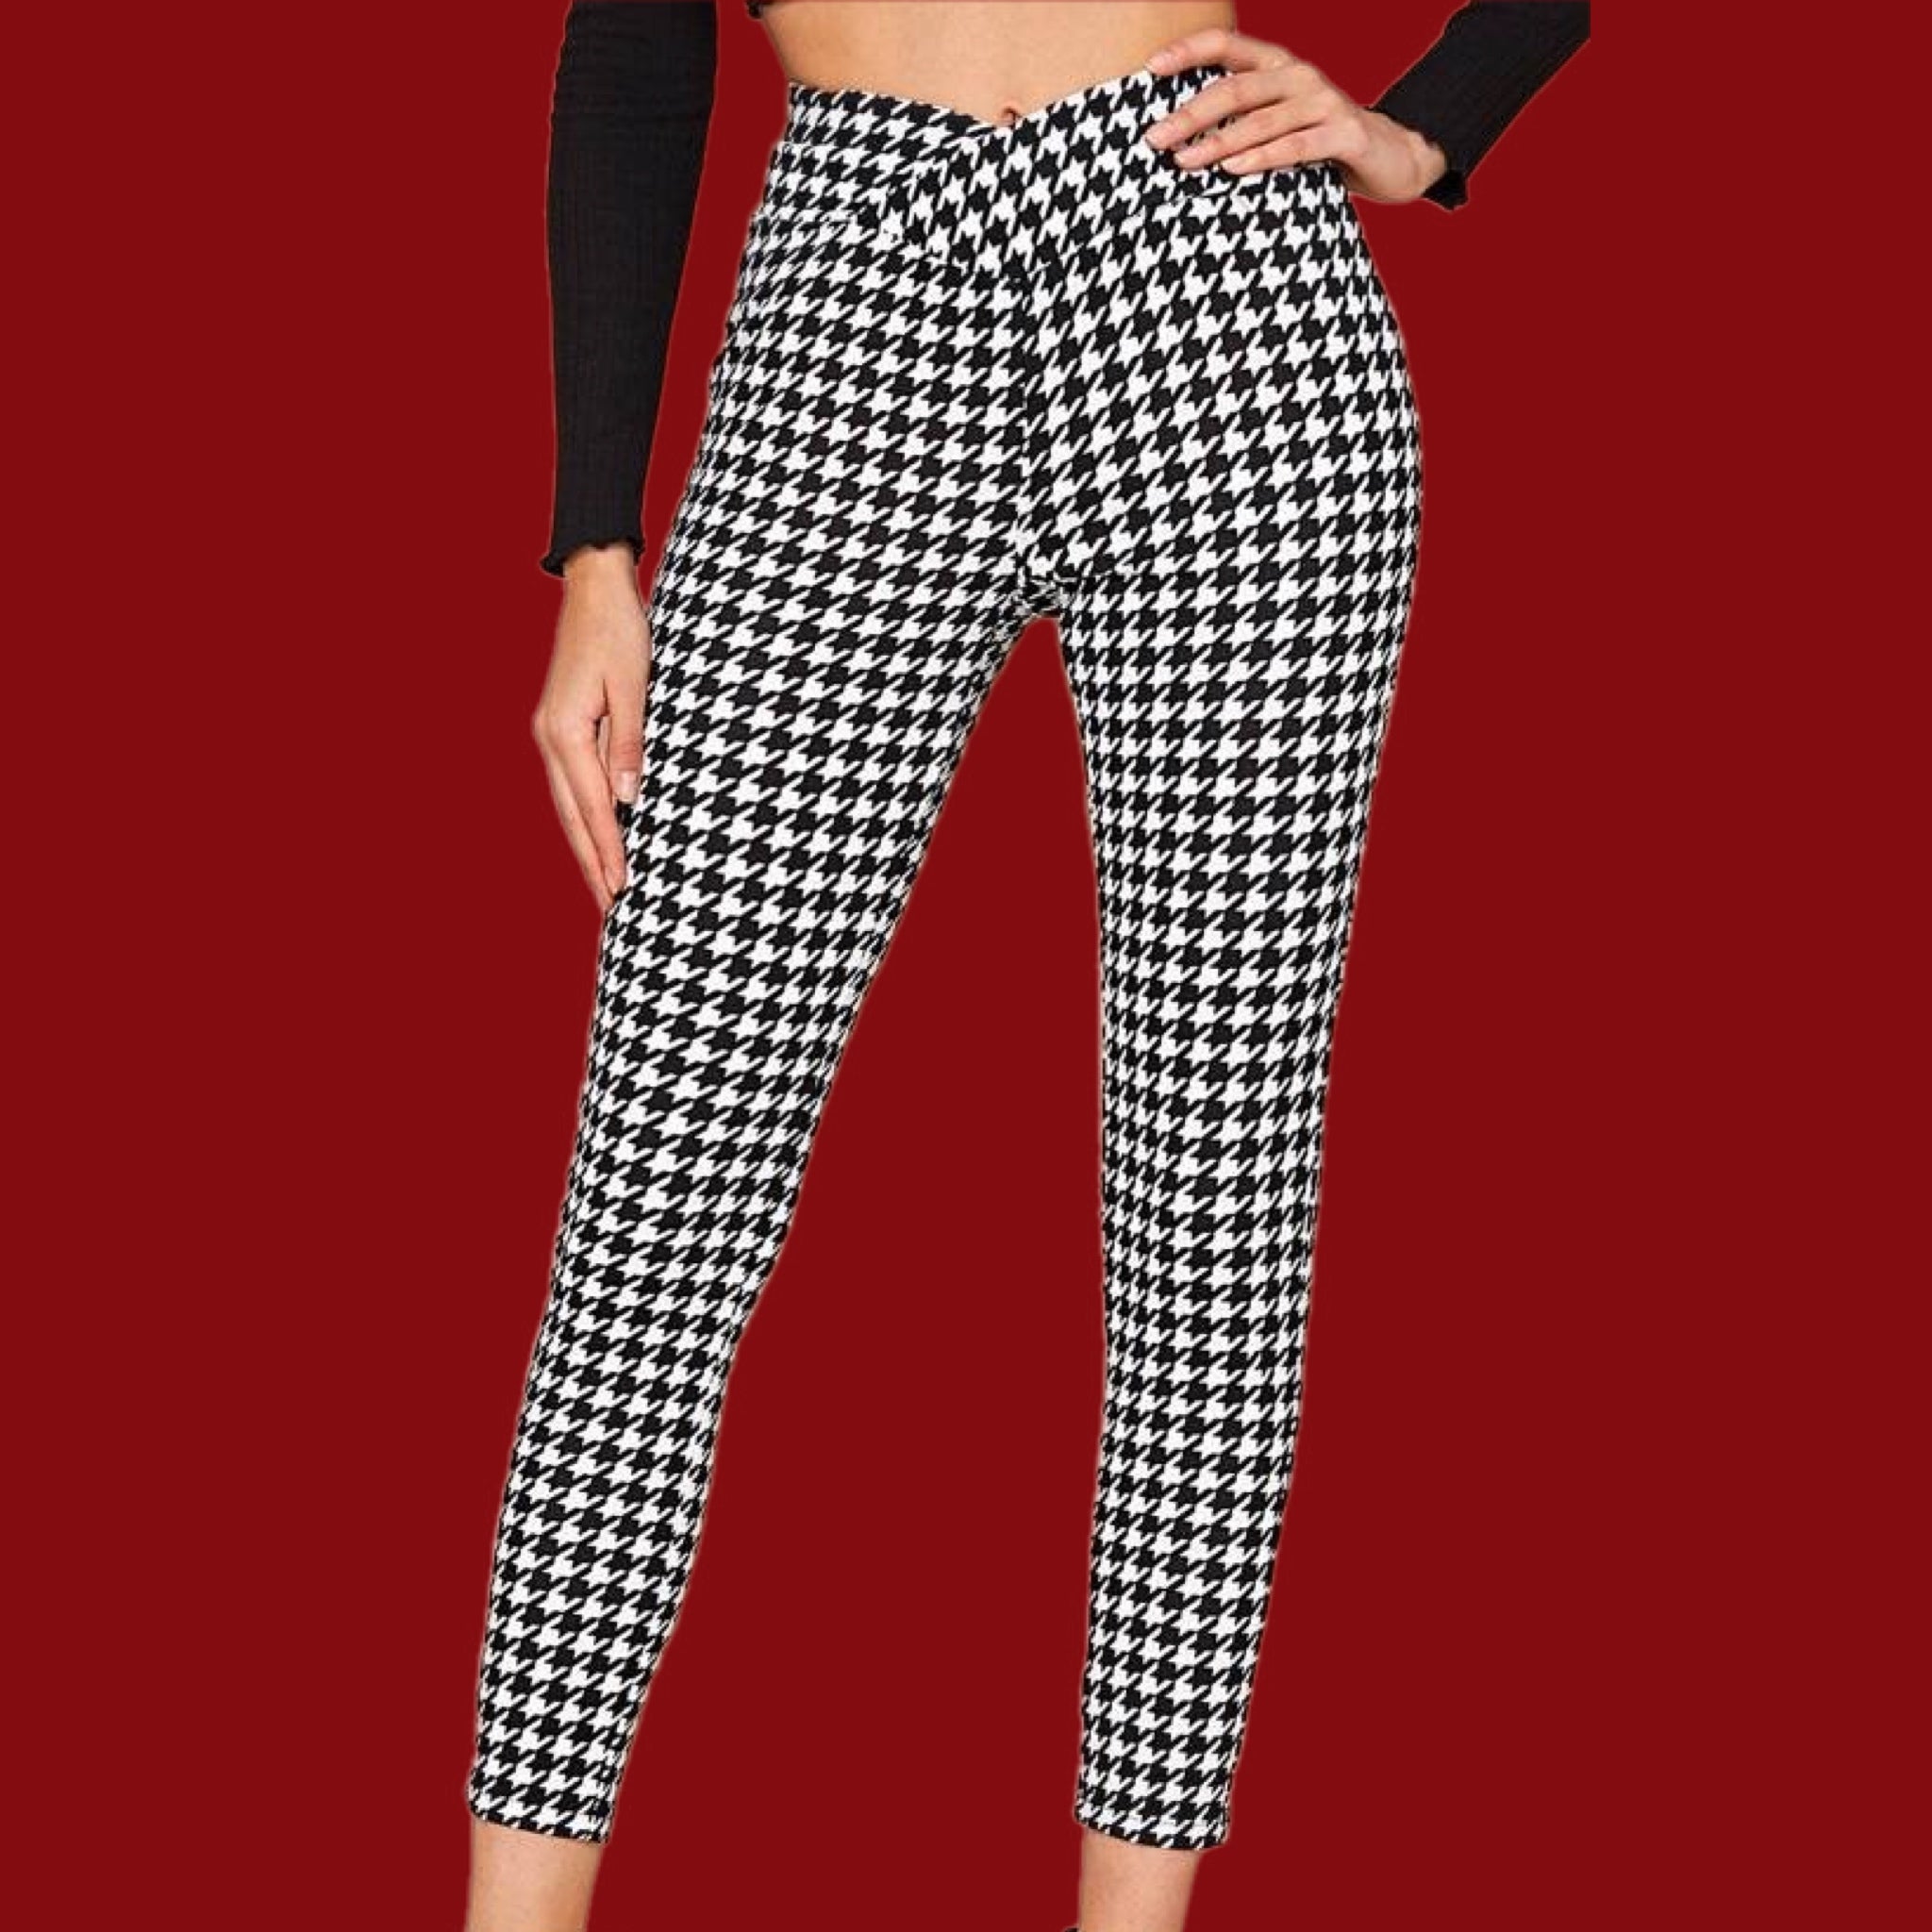 Black and White Houndstooth Silky Leggings – Just Your Average Gal